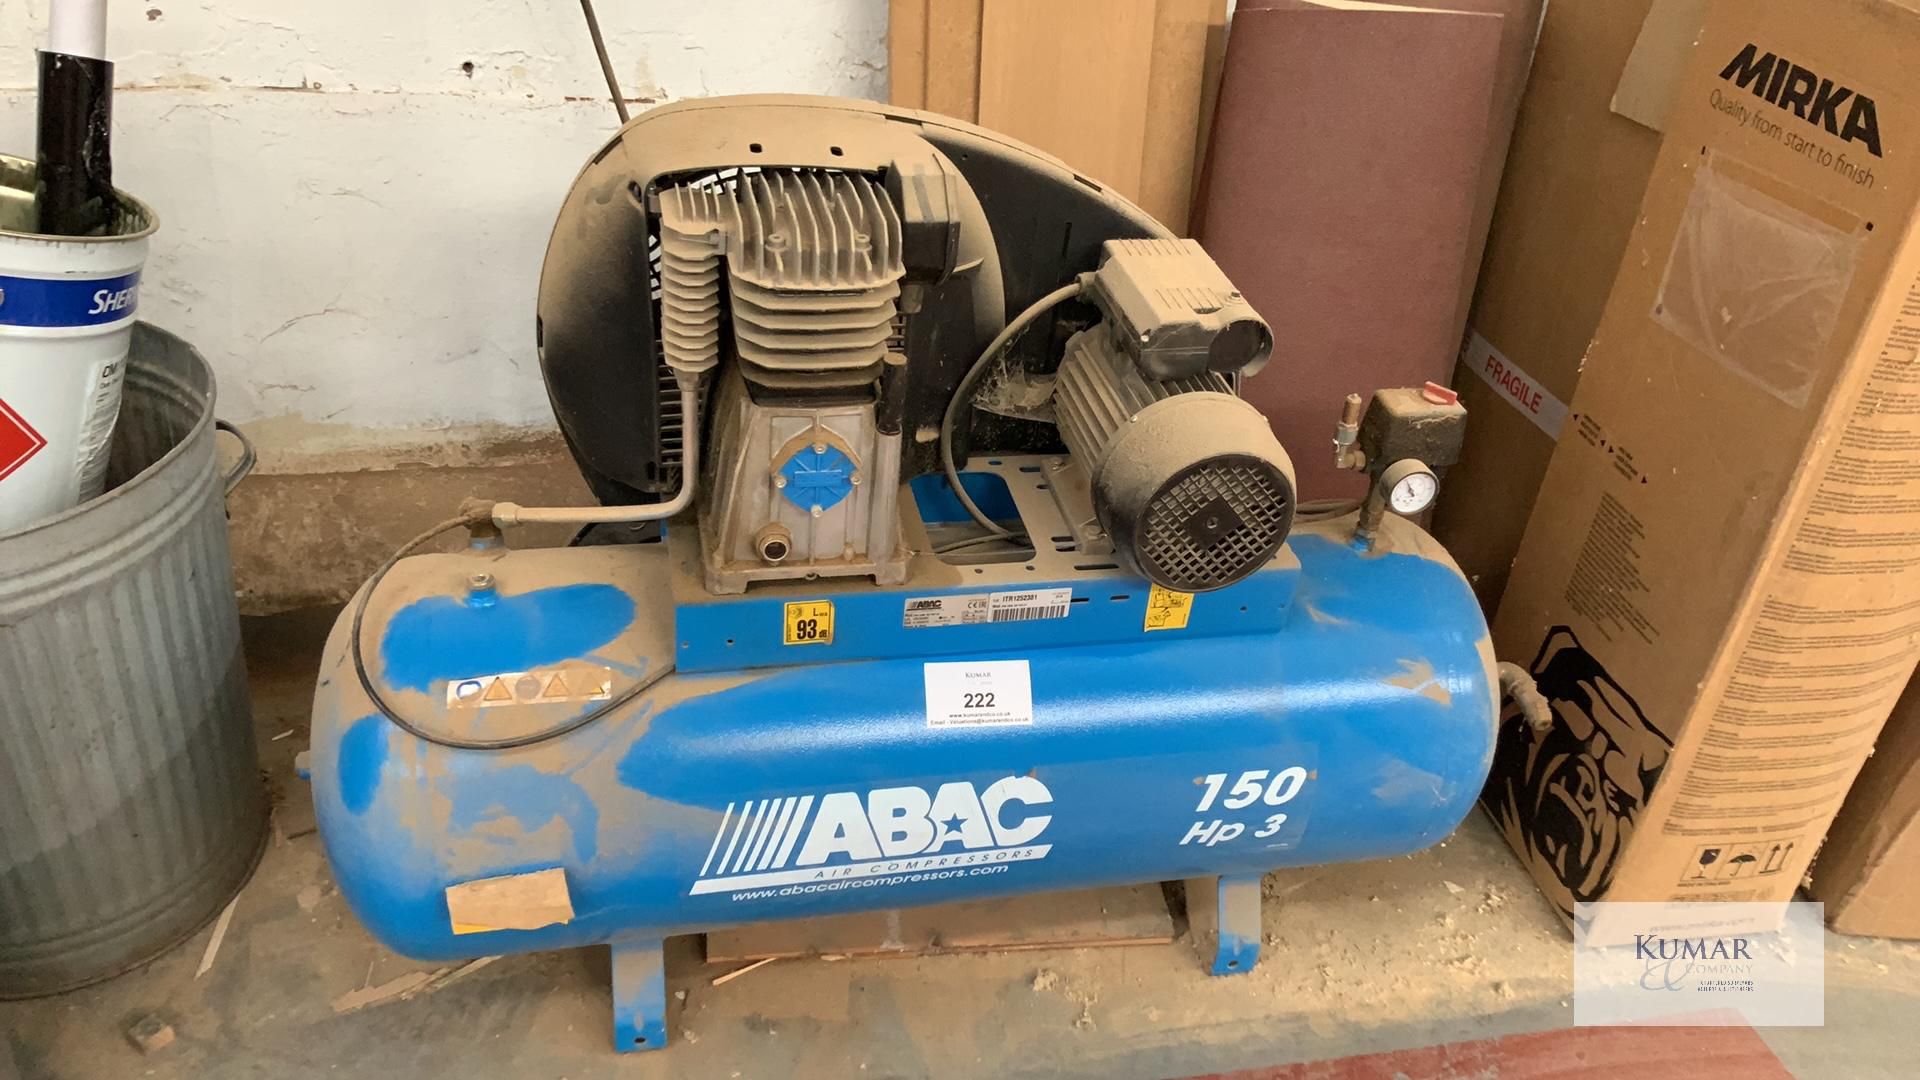 ABAC 150 HP 3 Pro A39BReceiver Mounted Air Compressor, 10 Bar (2018)